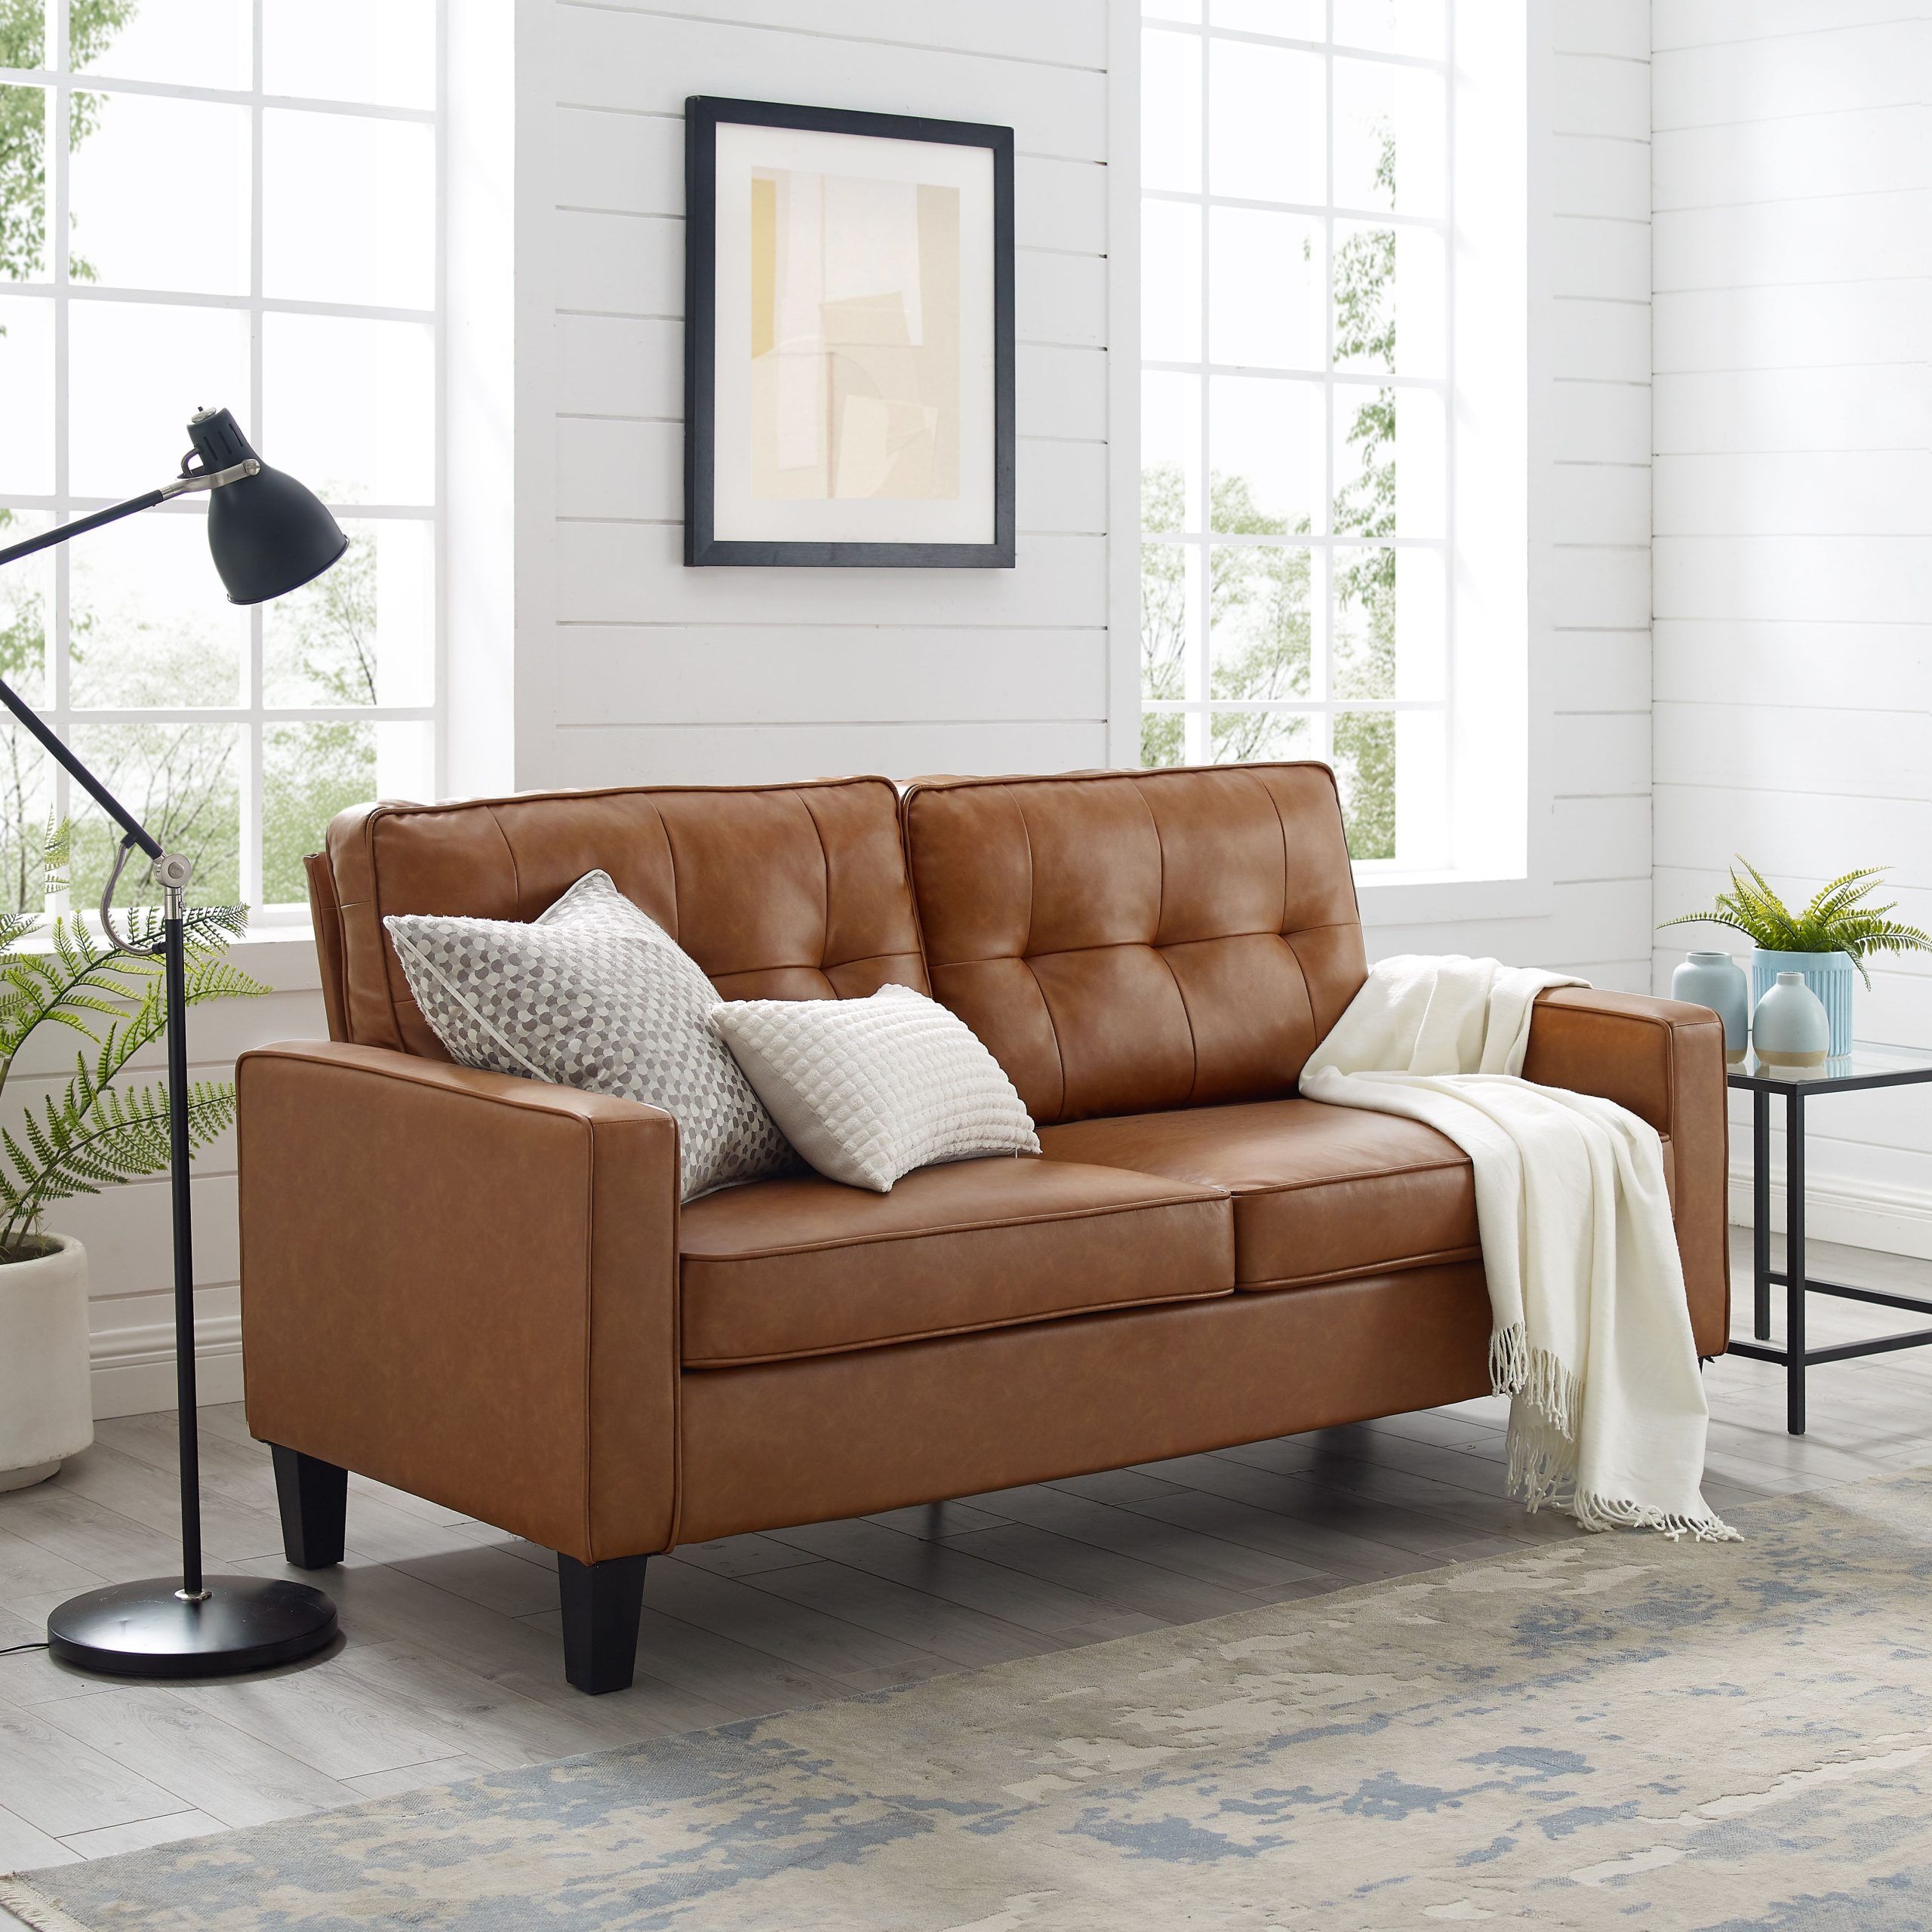 Mainstays Faux Leather Apartment Sofa Brown – Walmart Intended For Faux Leather Sofas In Chocolate Brown (View 6 of 20)